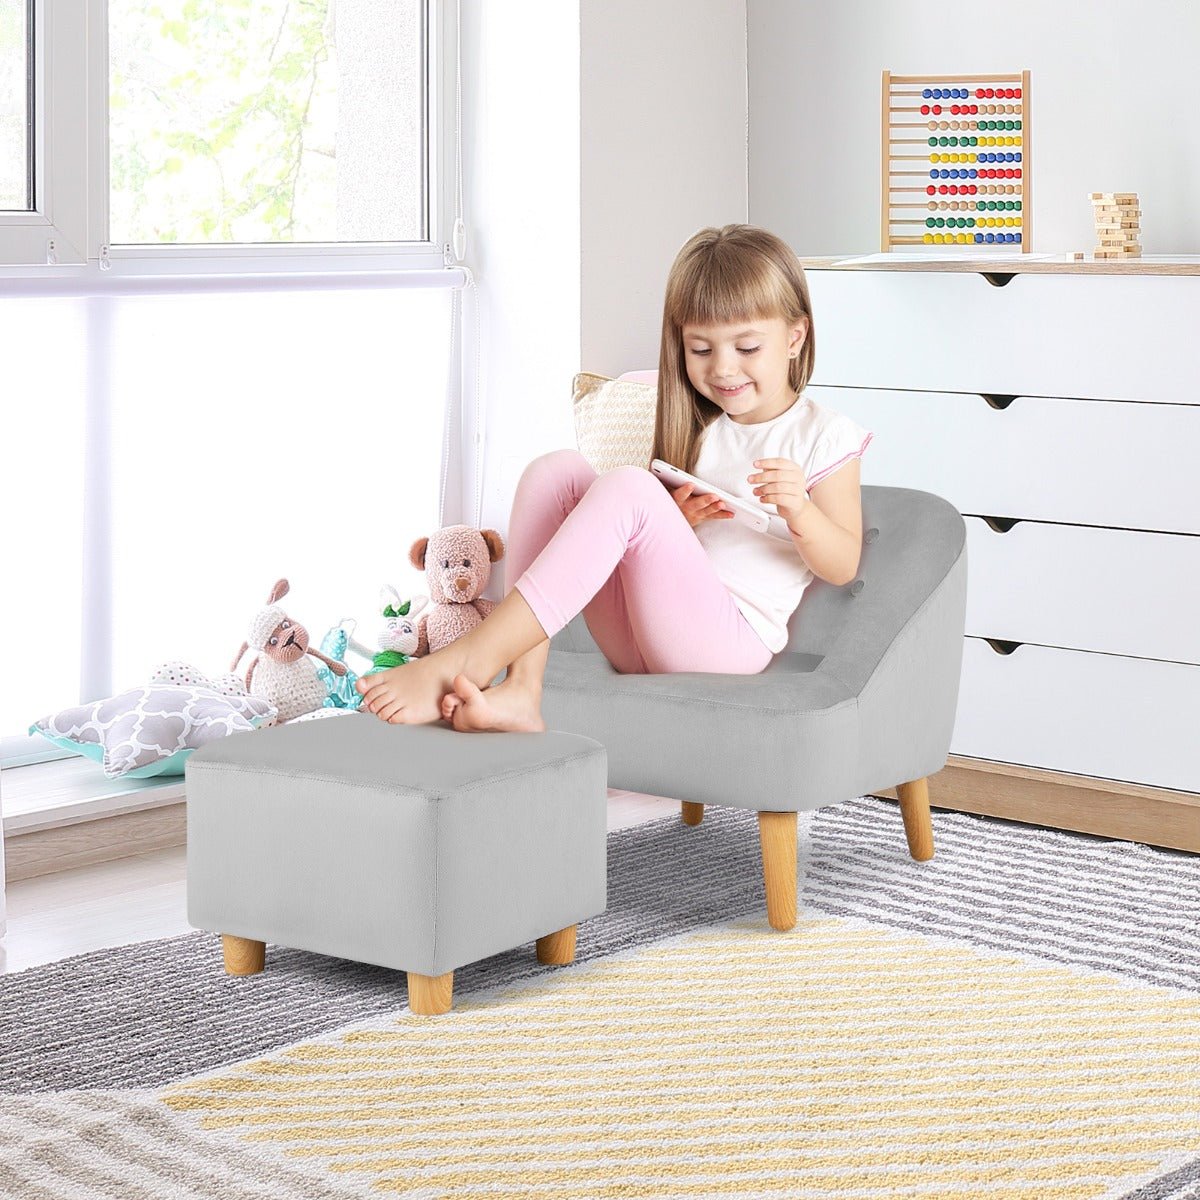 Children's Grey Sofa Chair & Stool - Ages 3-5, Comfortable Duo